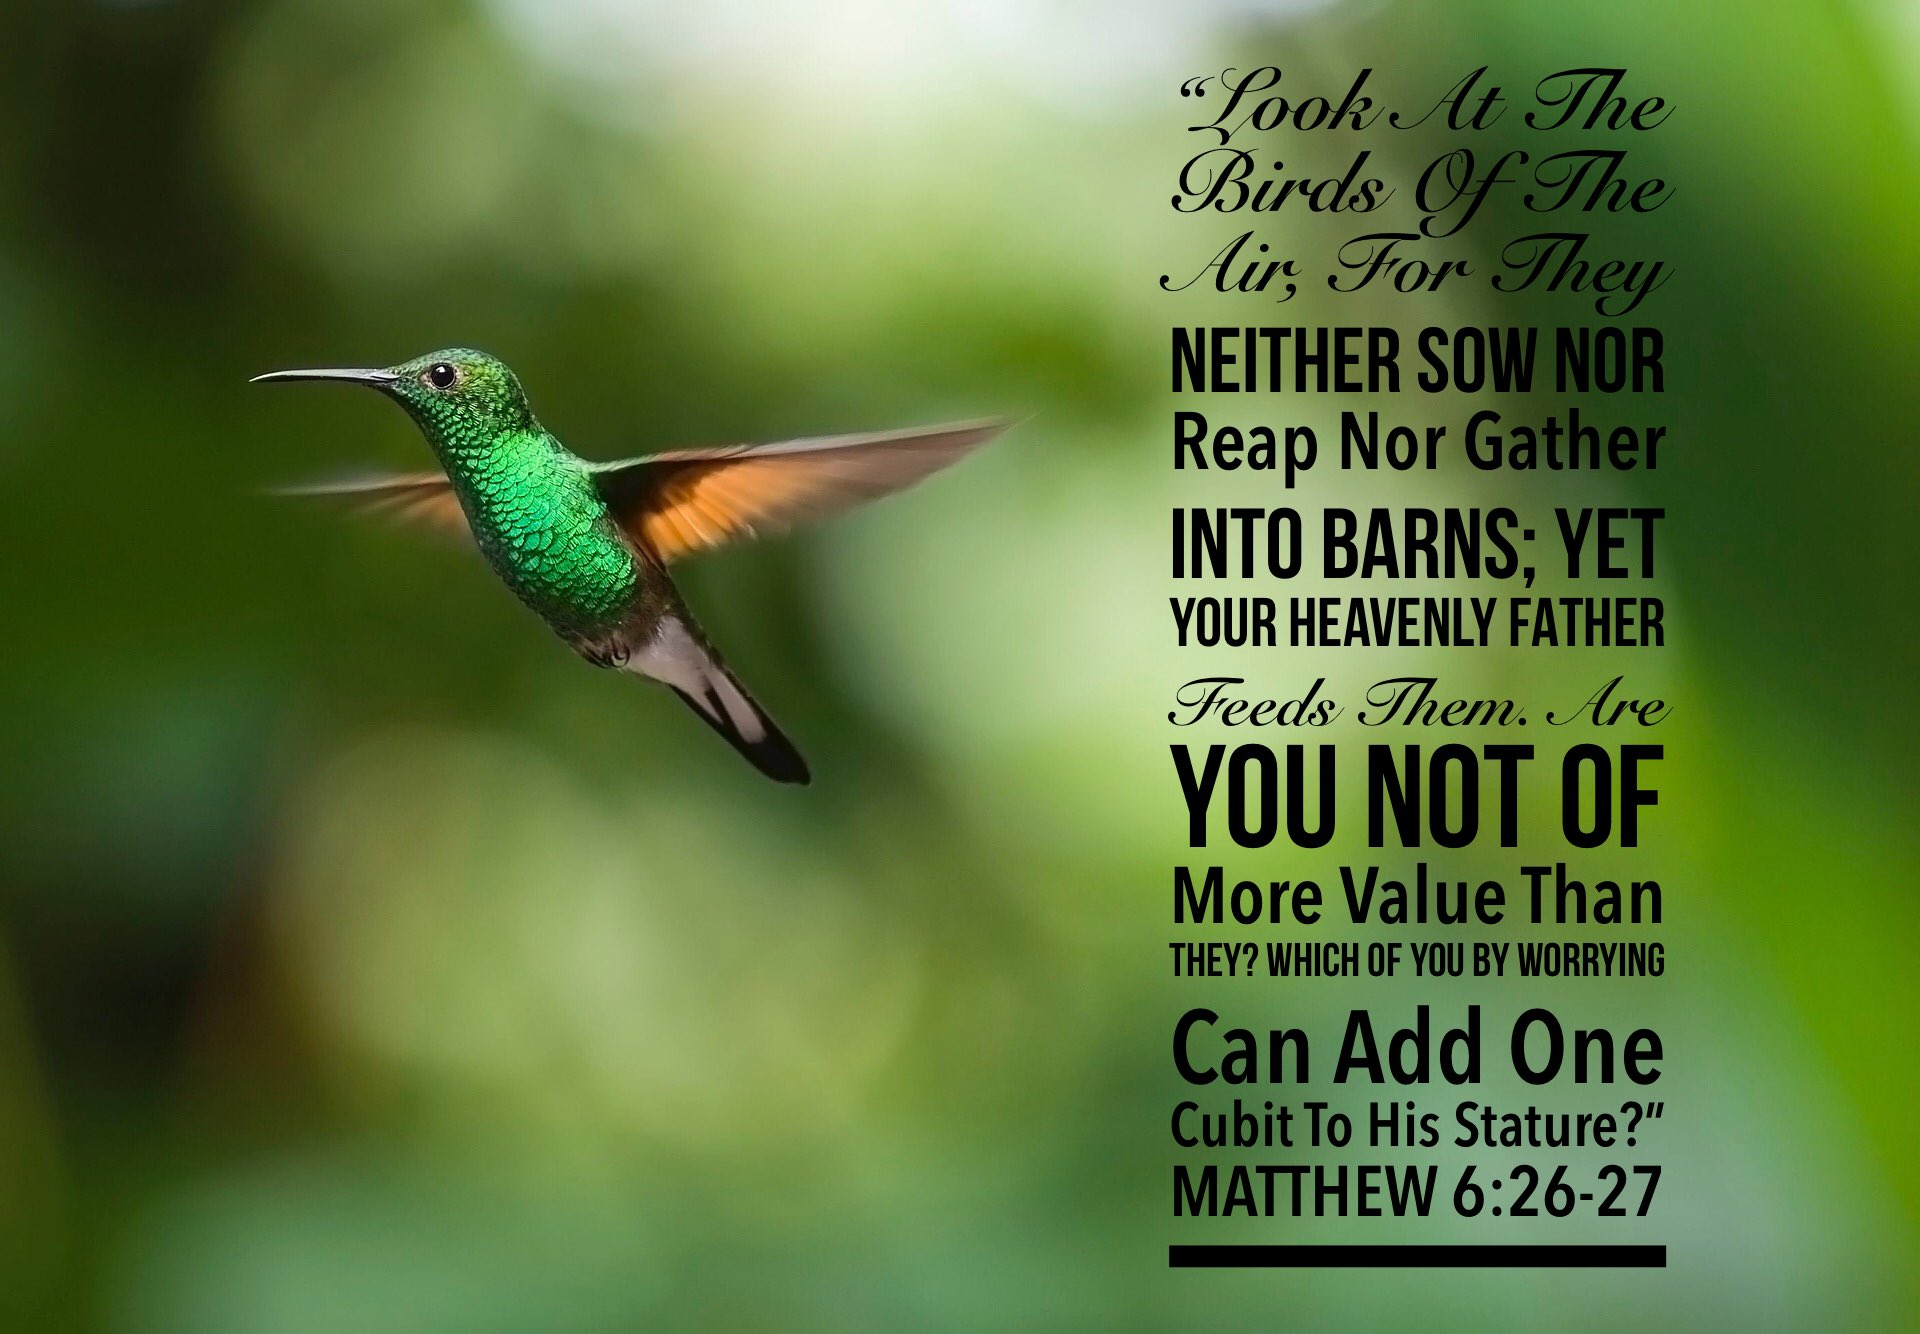 Why B Mad on Twitter: "MATTHEW 6:26-27 “Look At The Birds Of The ...